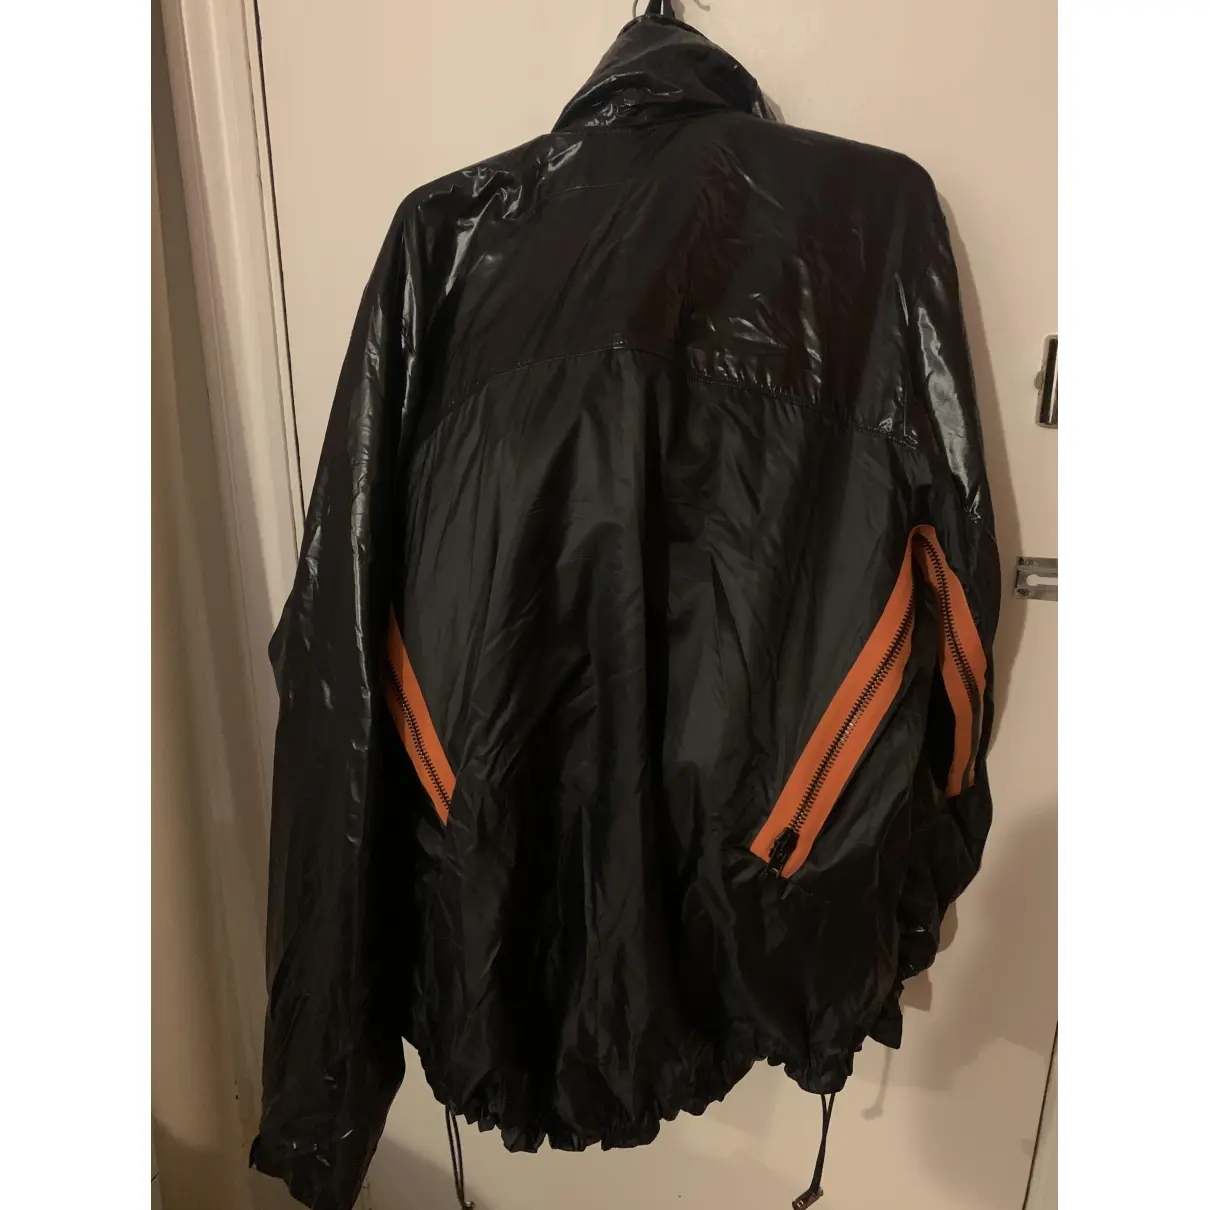 Buy Givenchy Leather jacket online